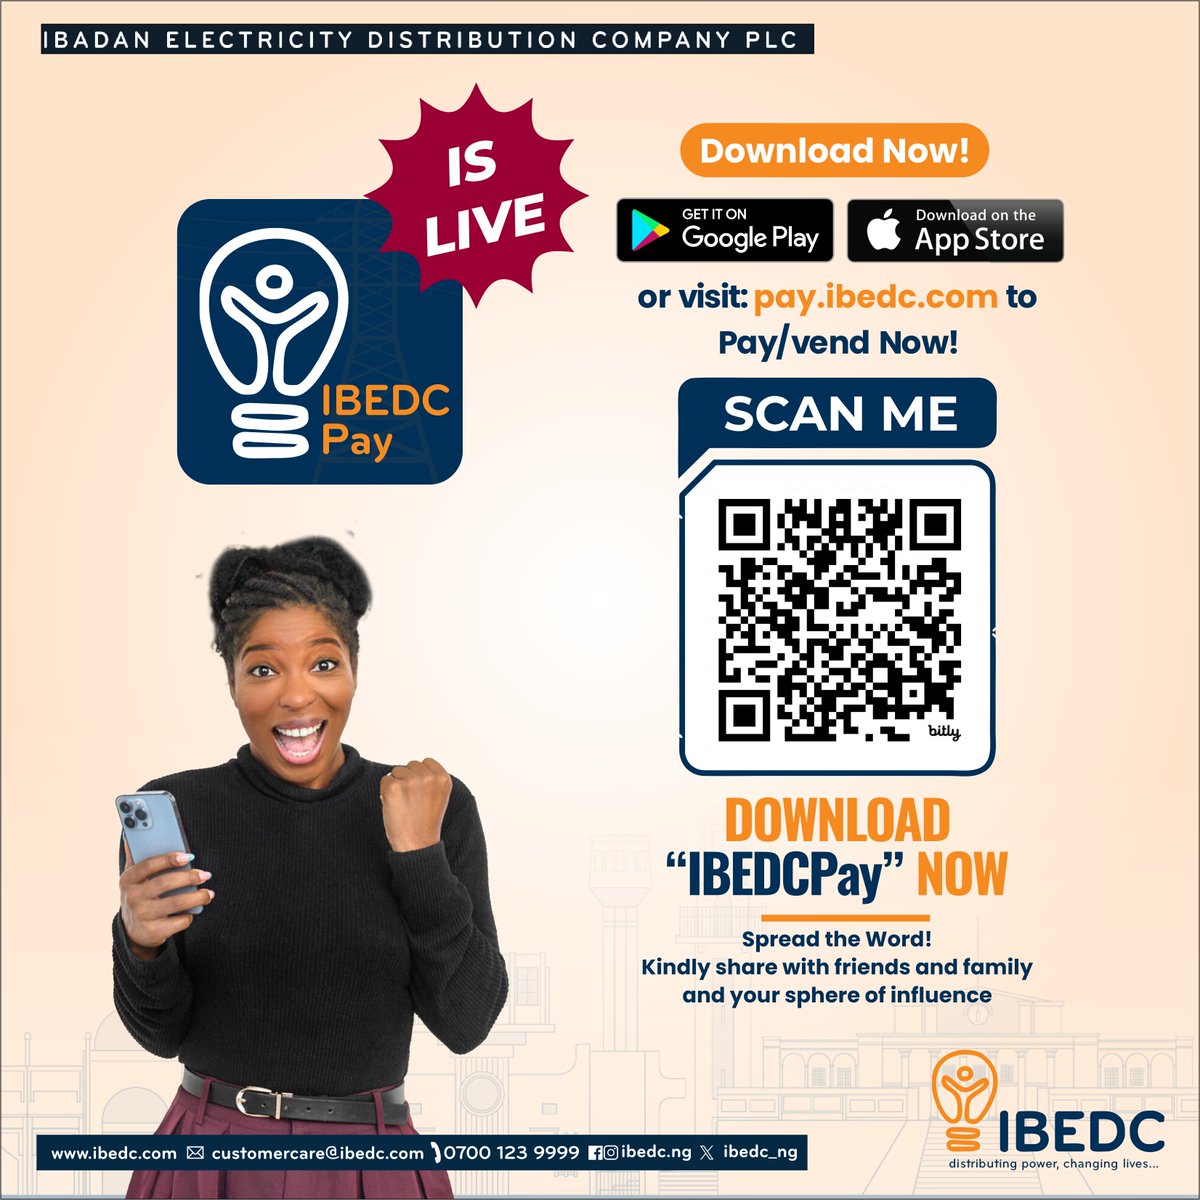 IBEDCPay is LIVE! Experience a convenient way to make payments/vend. Plus, it is faster and more reliable. Scan the Code or click here to download IBEDCpay: 
bit.ly/4ae5PBm.  #ibedc #Payment #paymentapp #IBEDCPayapp #distributingpower #changinglives